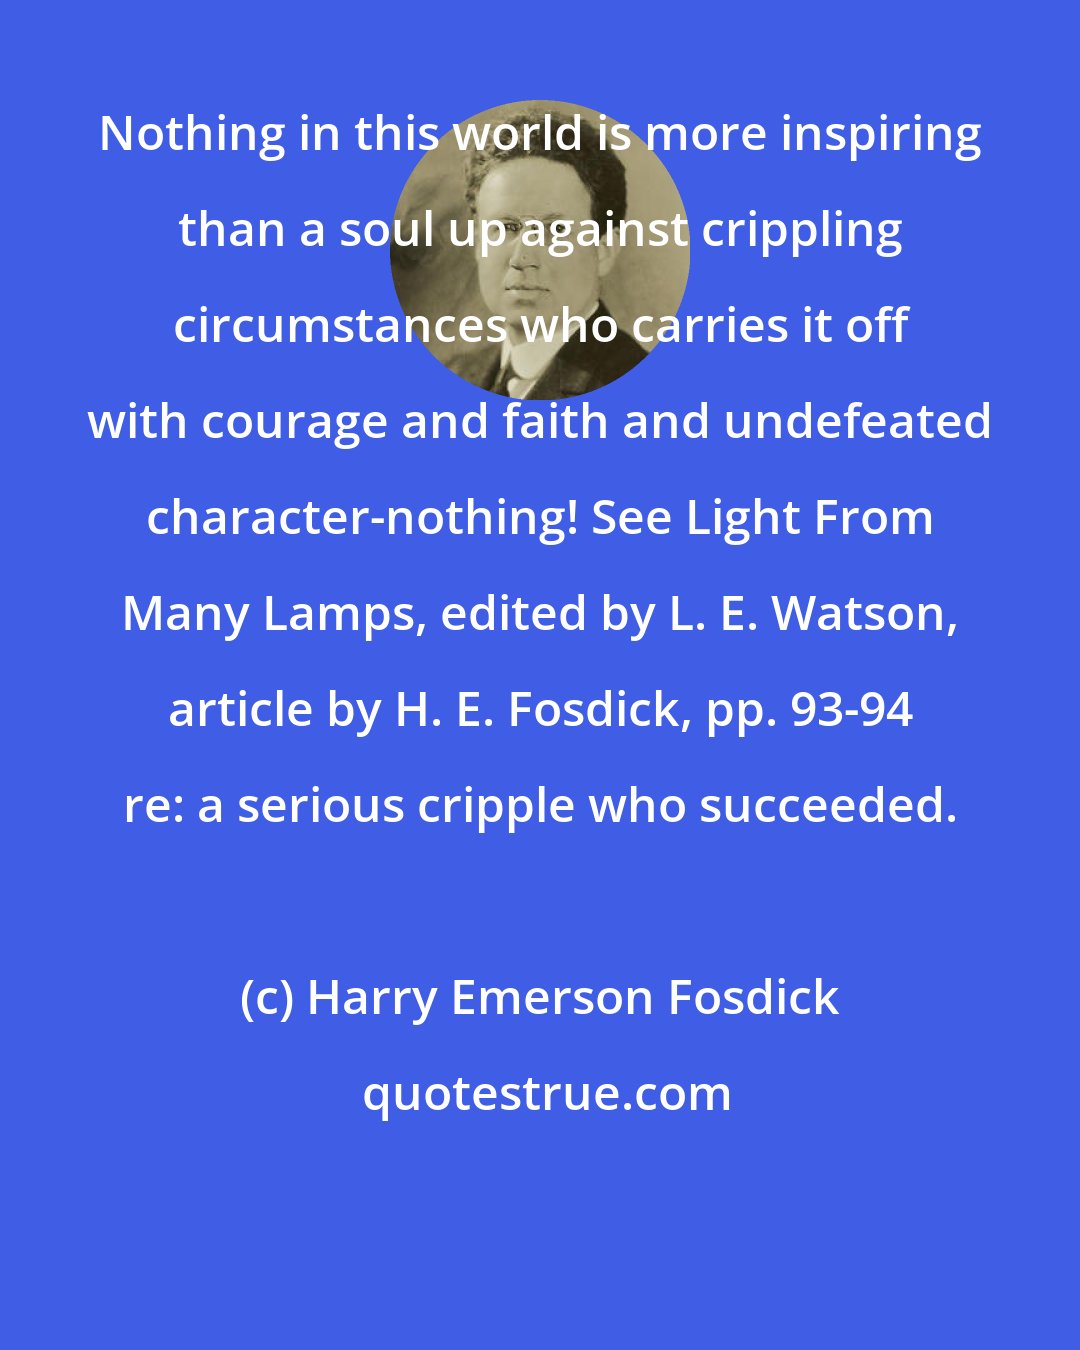 Harry Emerson Fosdick: Nothing in this world is more inspiring than a soul up against crippling circumstances who carries it off with courage and faith and undefeated character-nothing! See Light From Many Lamps, edited by L. E. Watson, article by H. E. Fosdick, pp. 93-94 re: a serious cripple who succeeded.